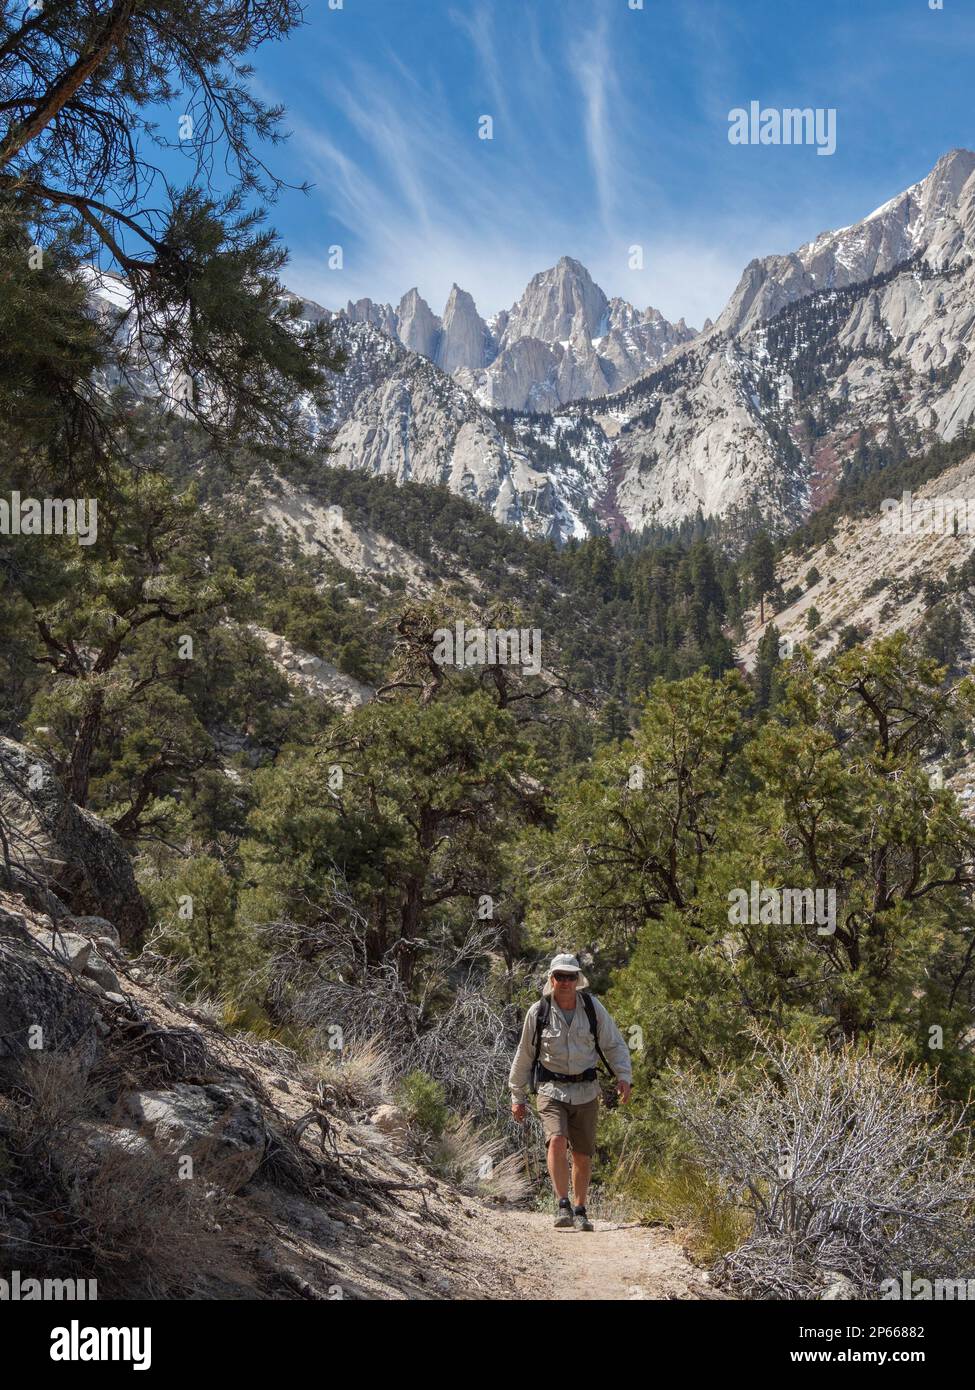 Mount Whitney, the tallest mountain in the contiguous U.S., Eastern Sierra Nevada Mountains, California, United States of America, North America Stock Photo